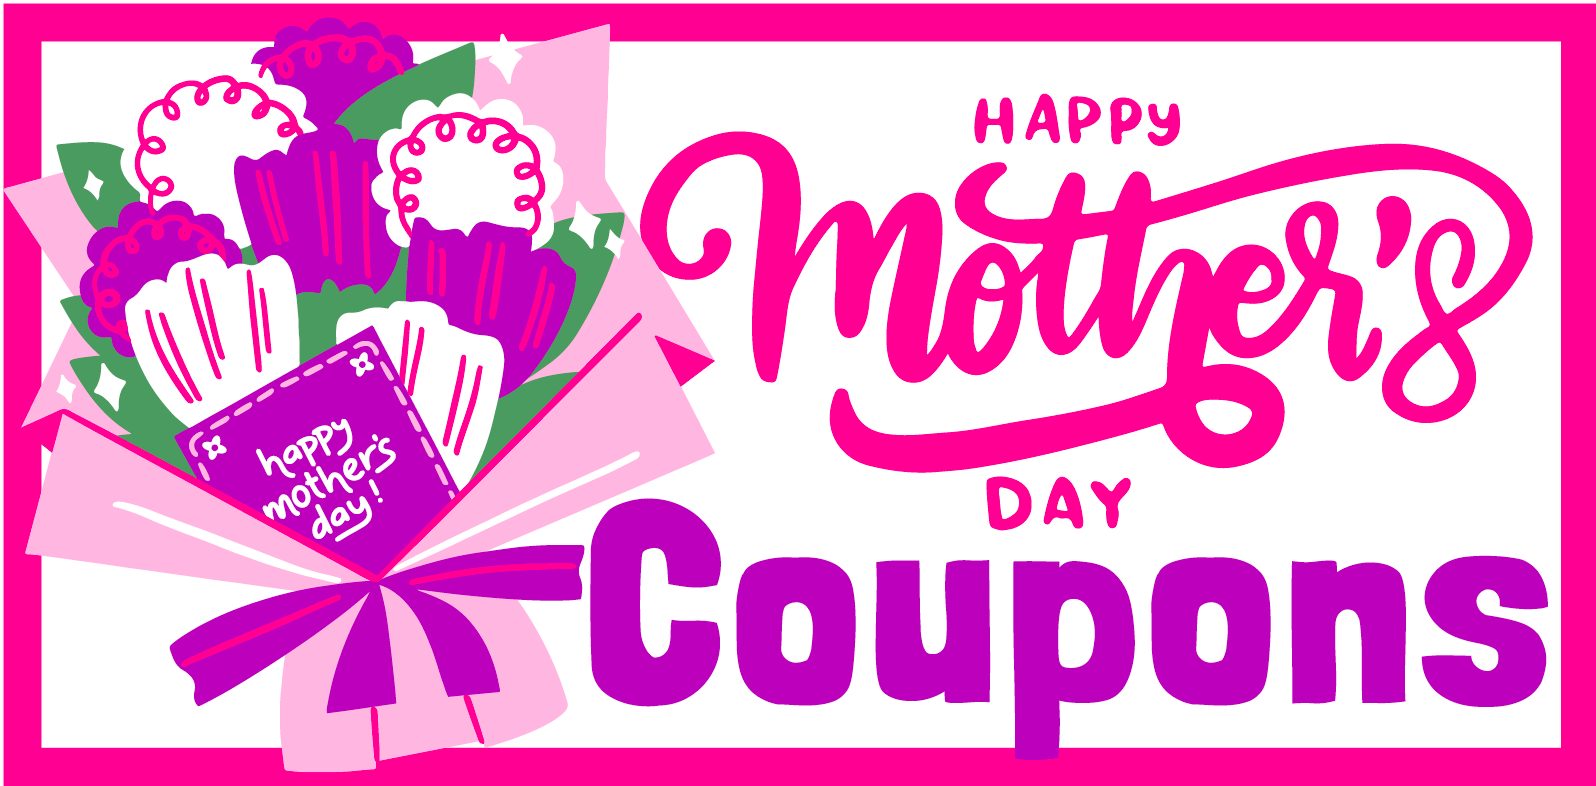 FREE Mother's Day Coupons